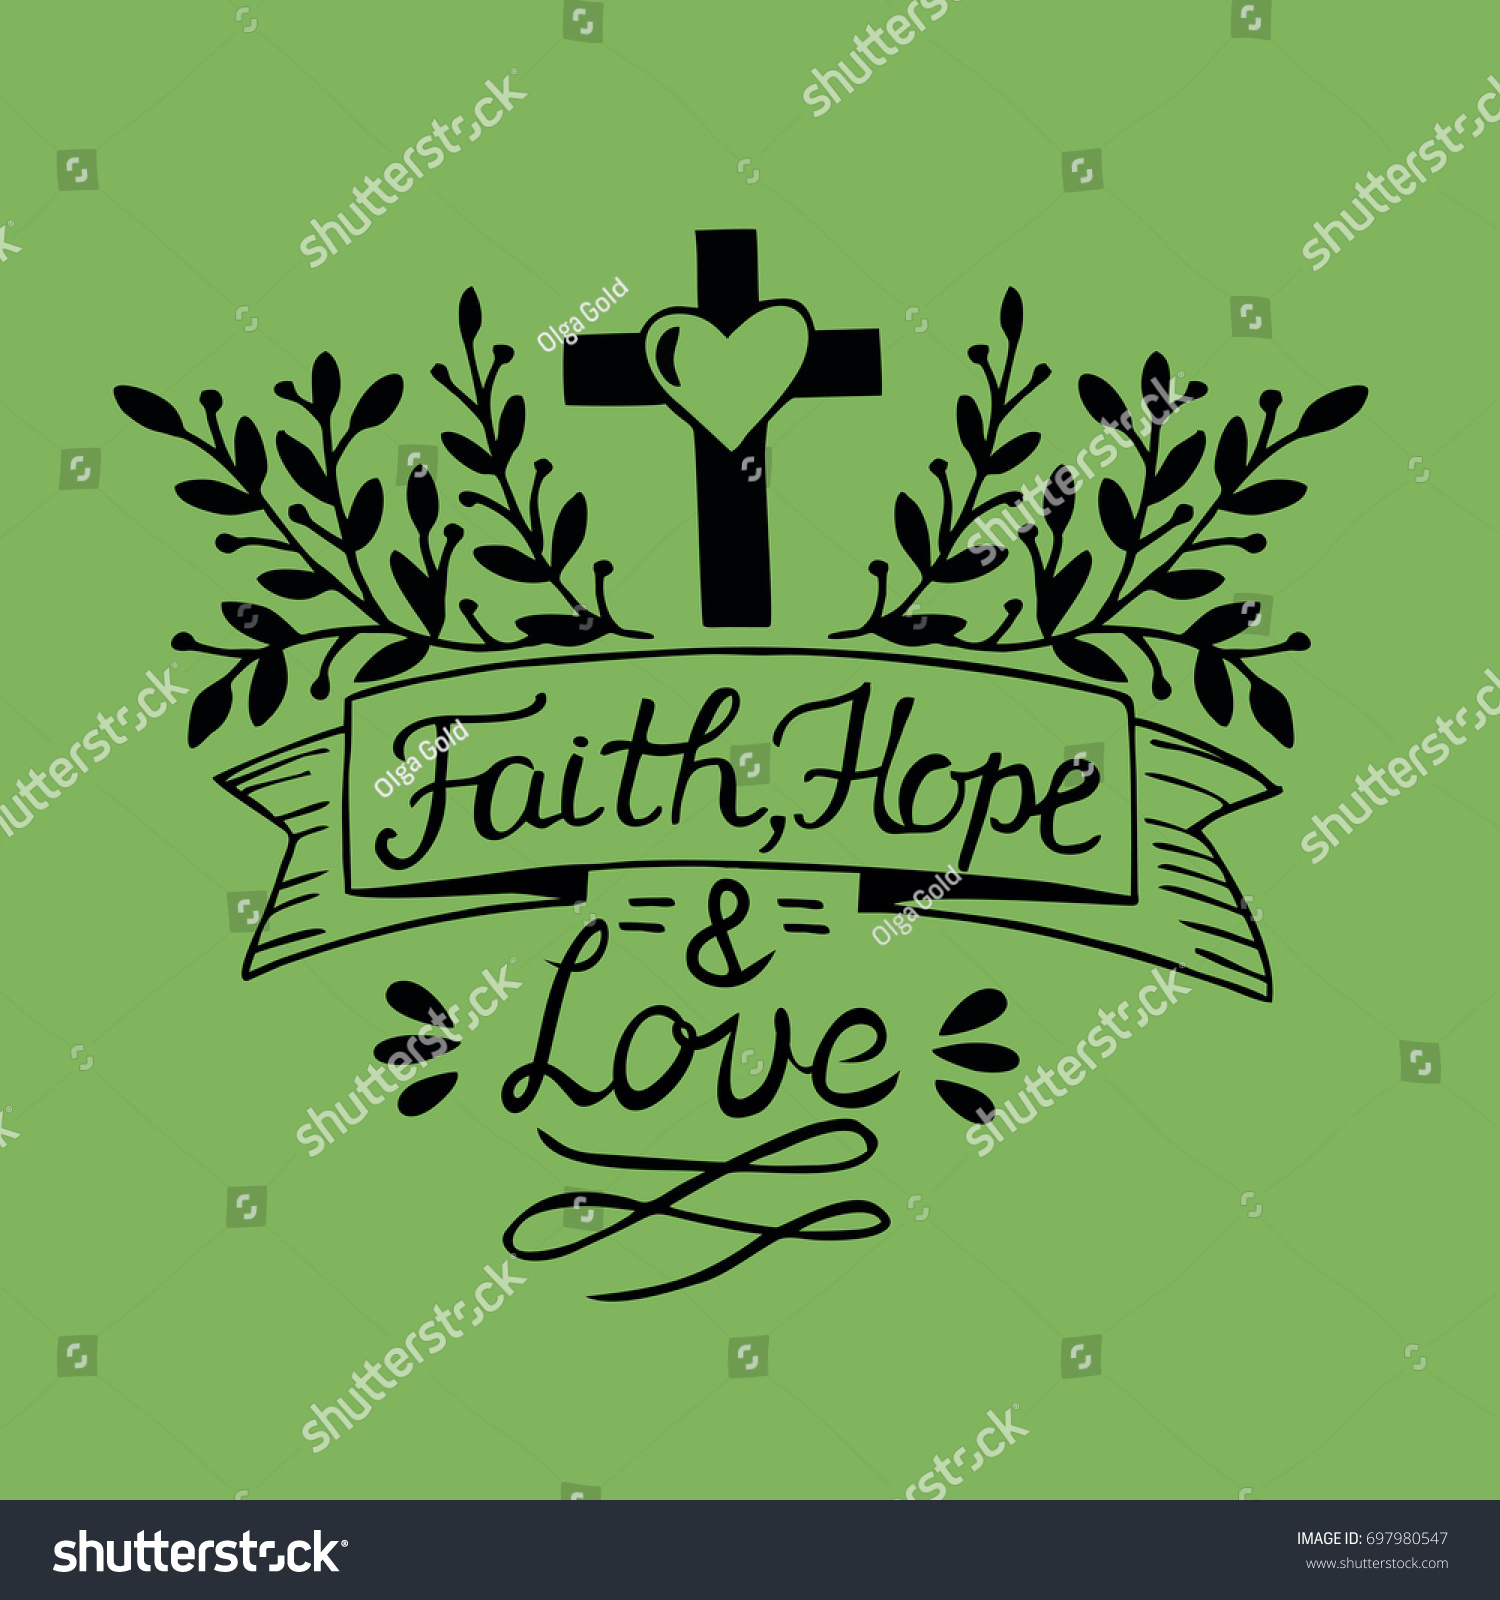 Hand lettering Faith hope and love on green background Bible verse Christian poster